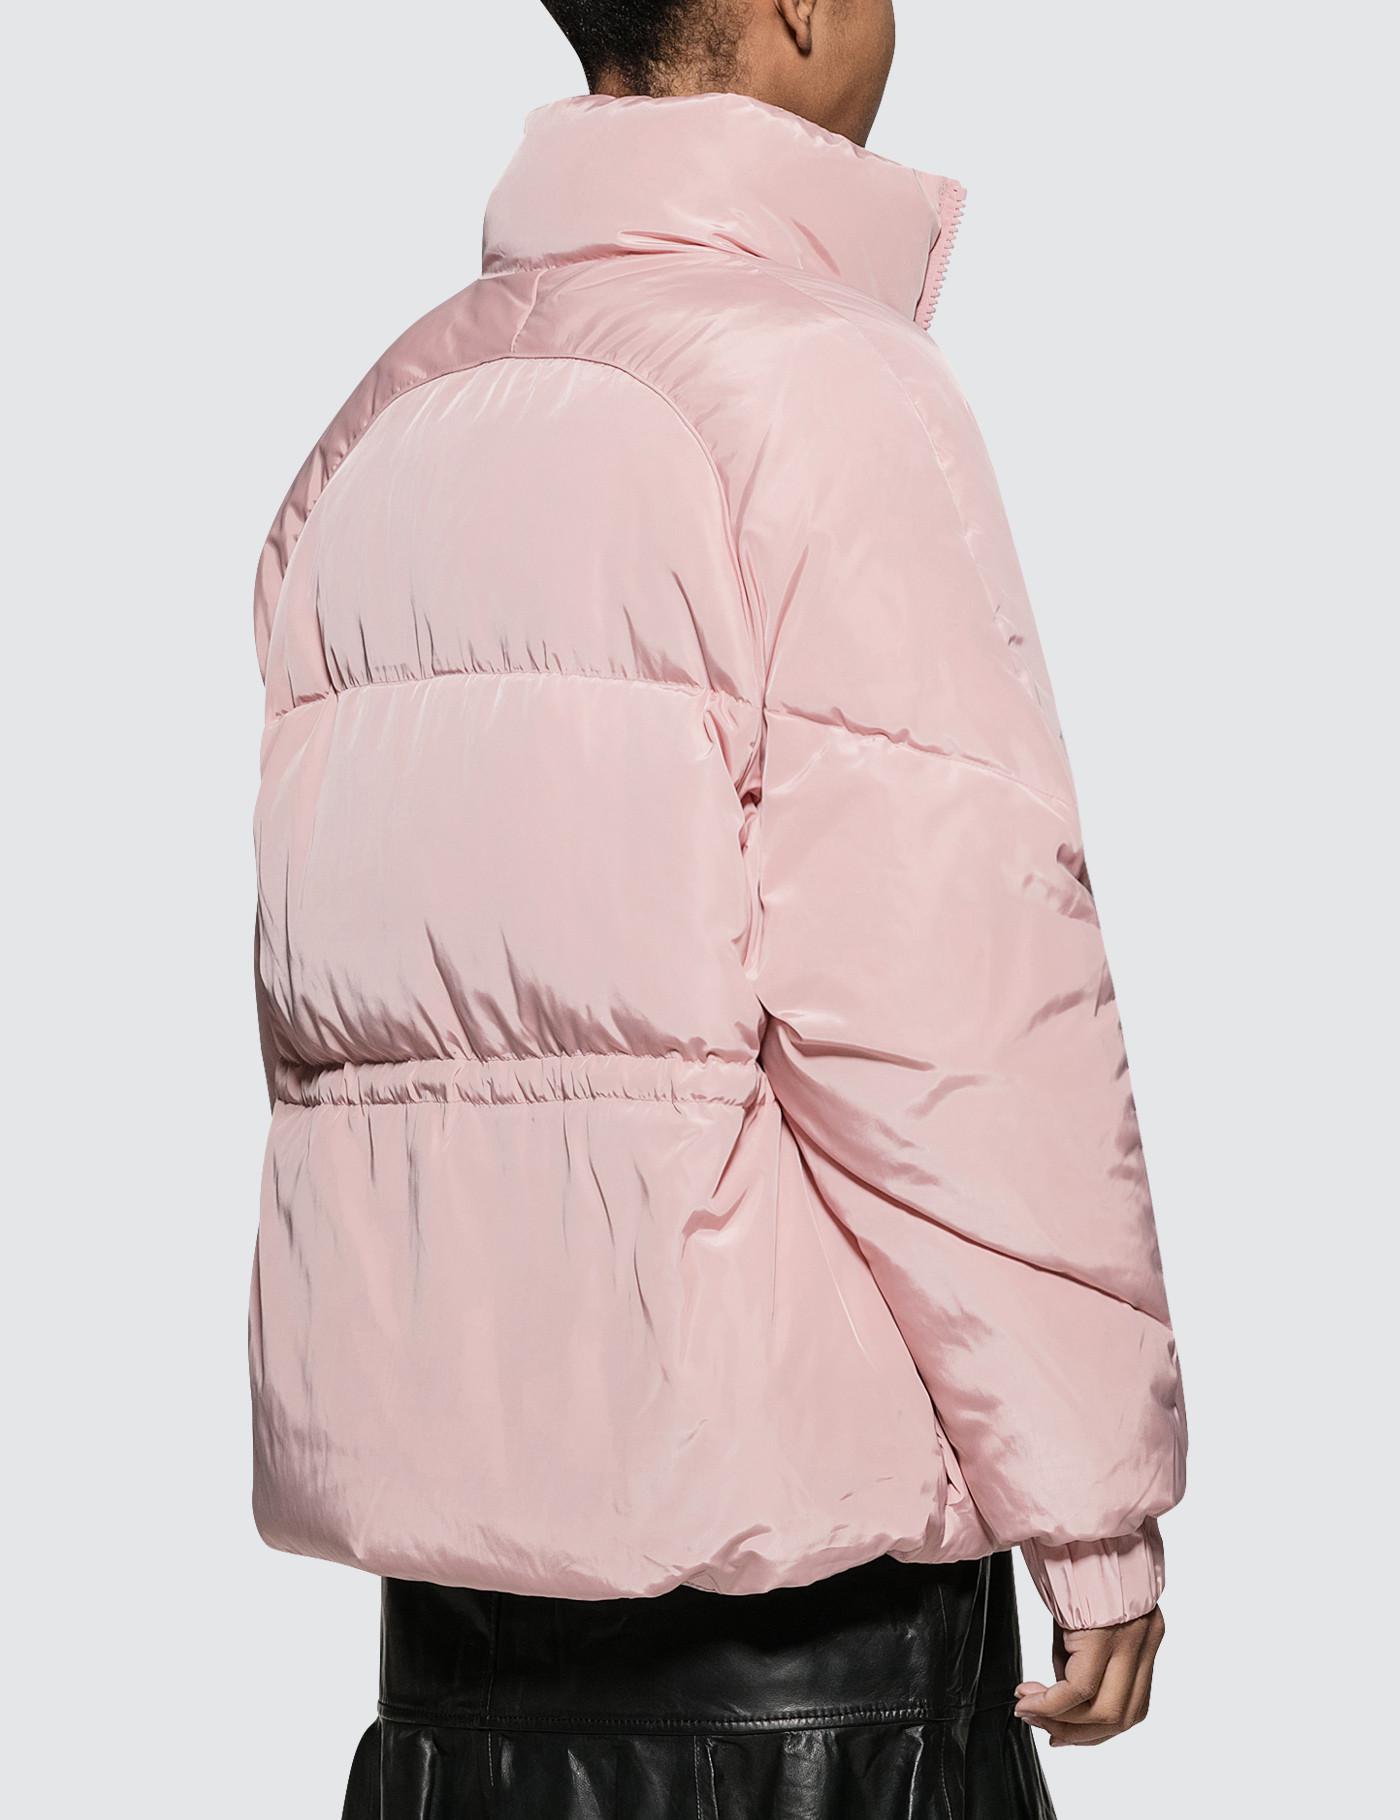 Ganni Synthetic Whitman Puffer Jacket in Pink - Lyst